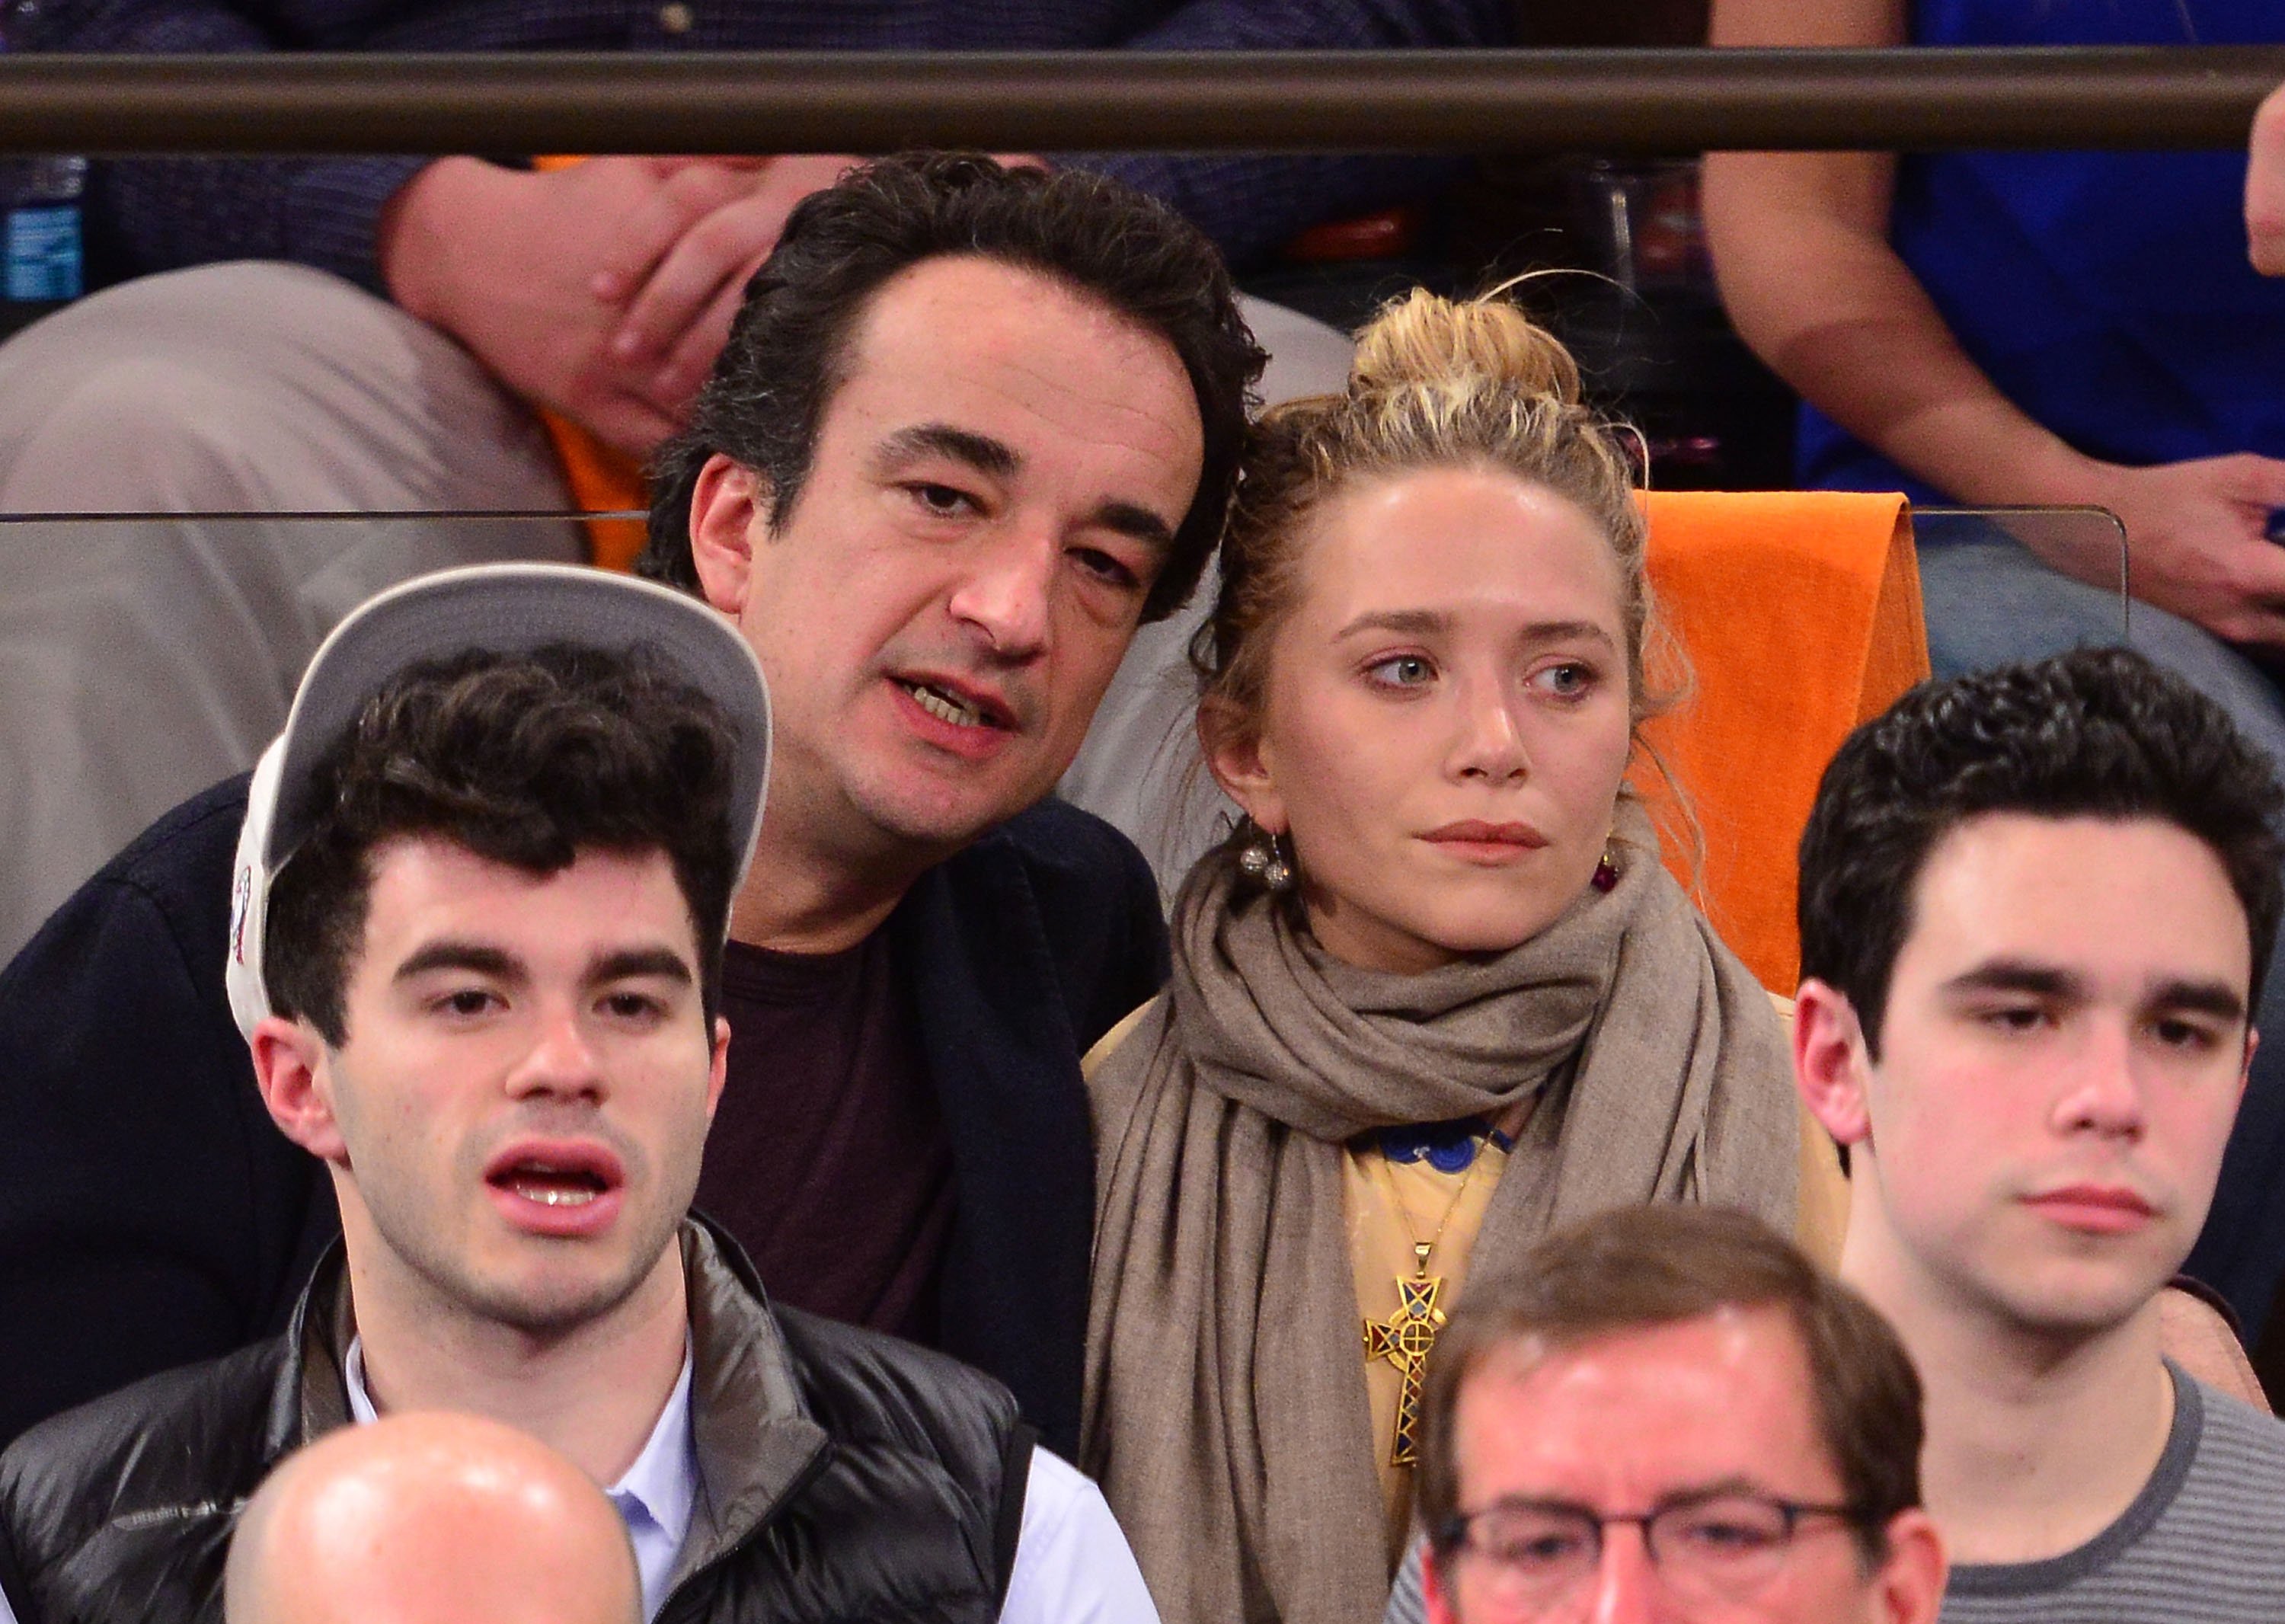 Olivier Sarkozy and Mary-Kate Olsen attending the Boston Celtics vs New York Knicks Playoff Game at Madison Square Garden on April 23, 2013 in New York City. / Source: Getty Images